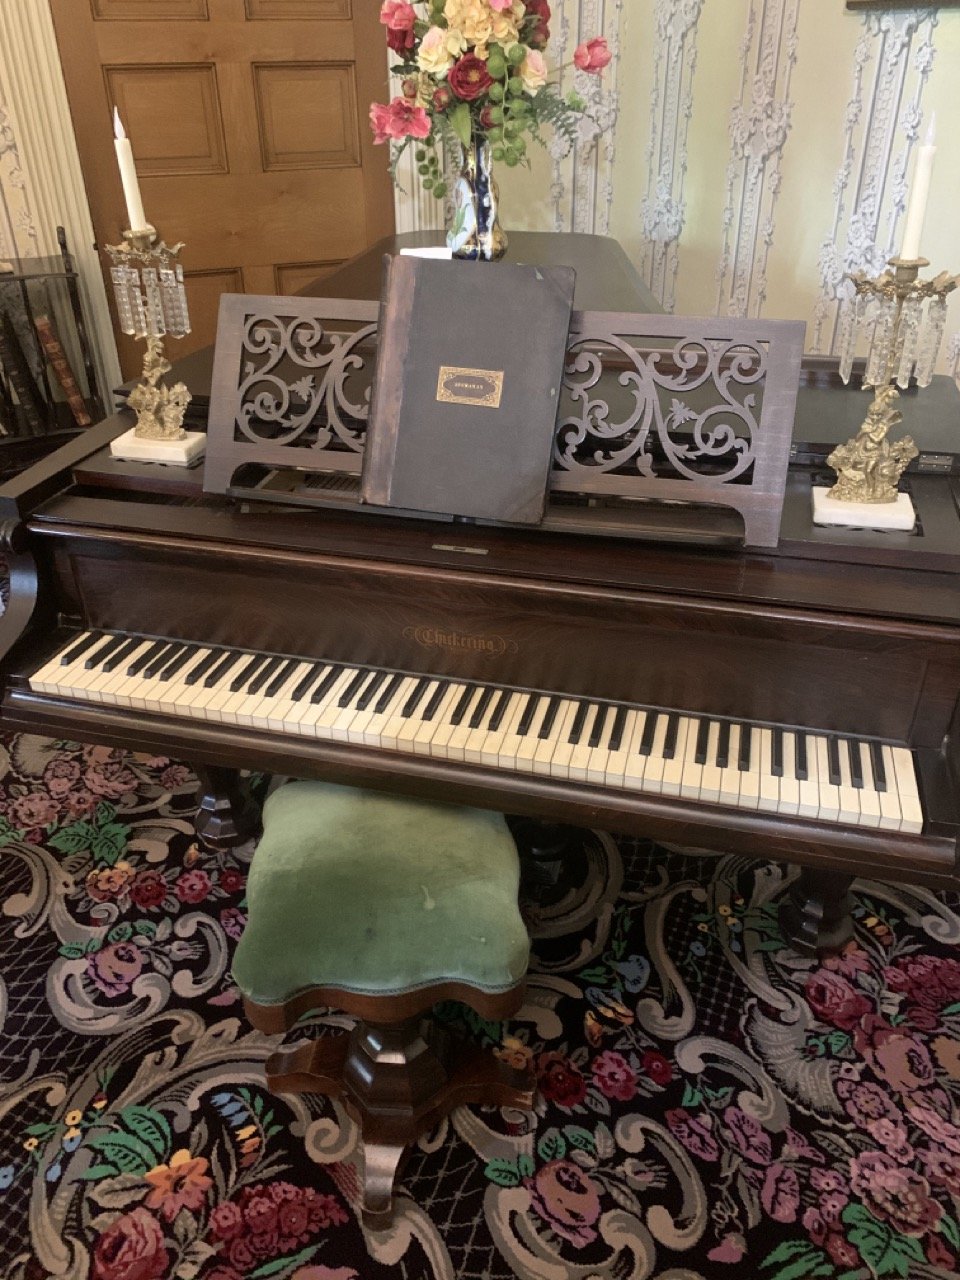 President Buchanan purchased this piano in 1865